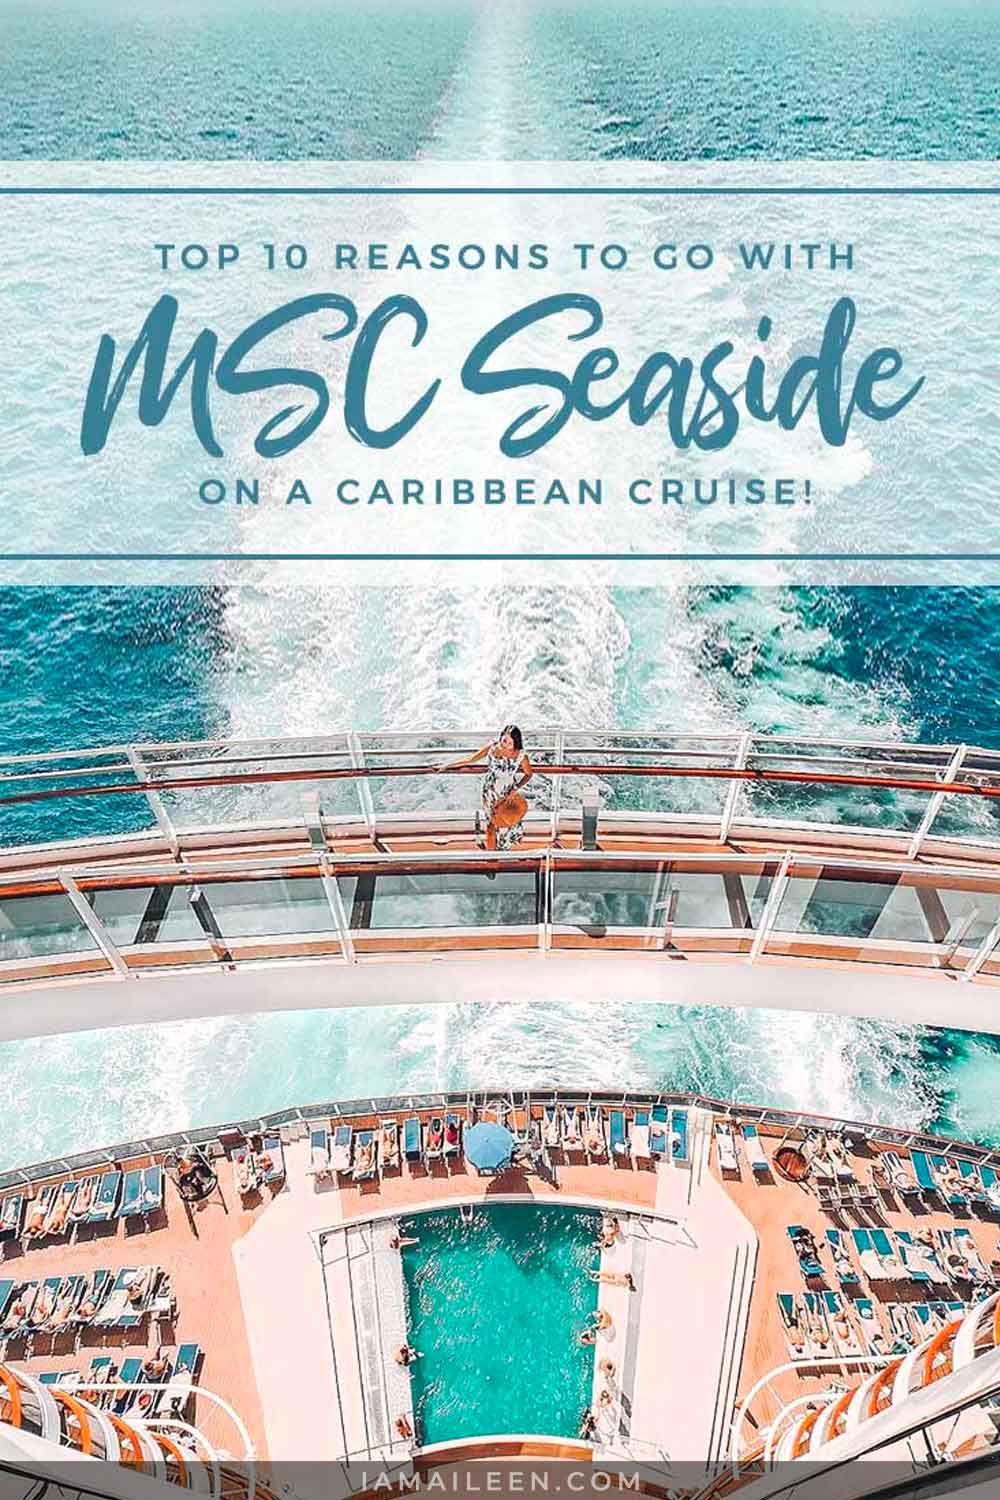 Top 10 Reasons to Go on a Cruise with MSC Seaside